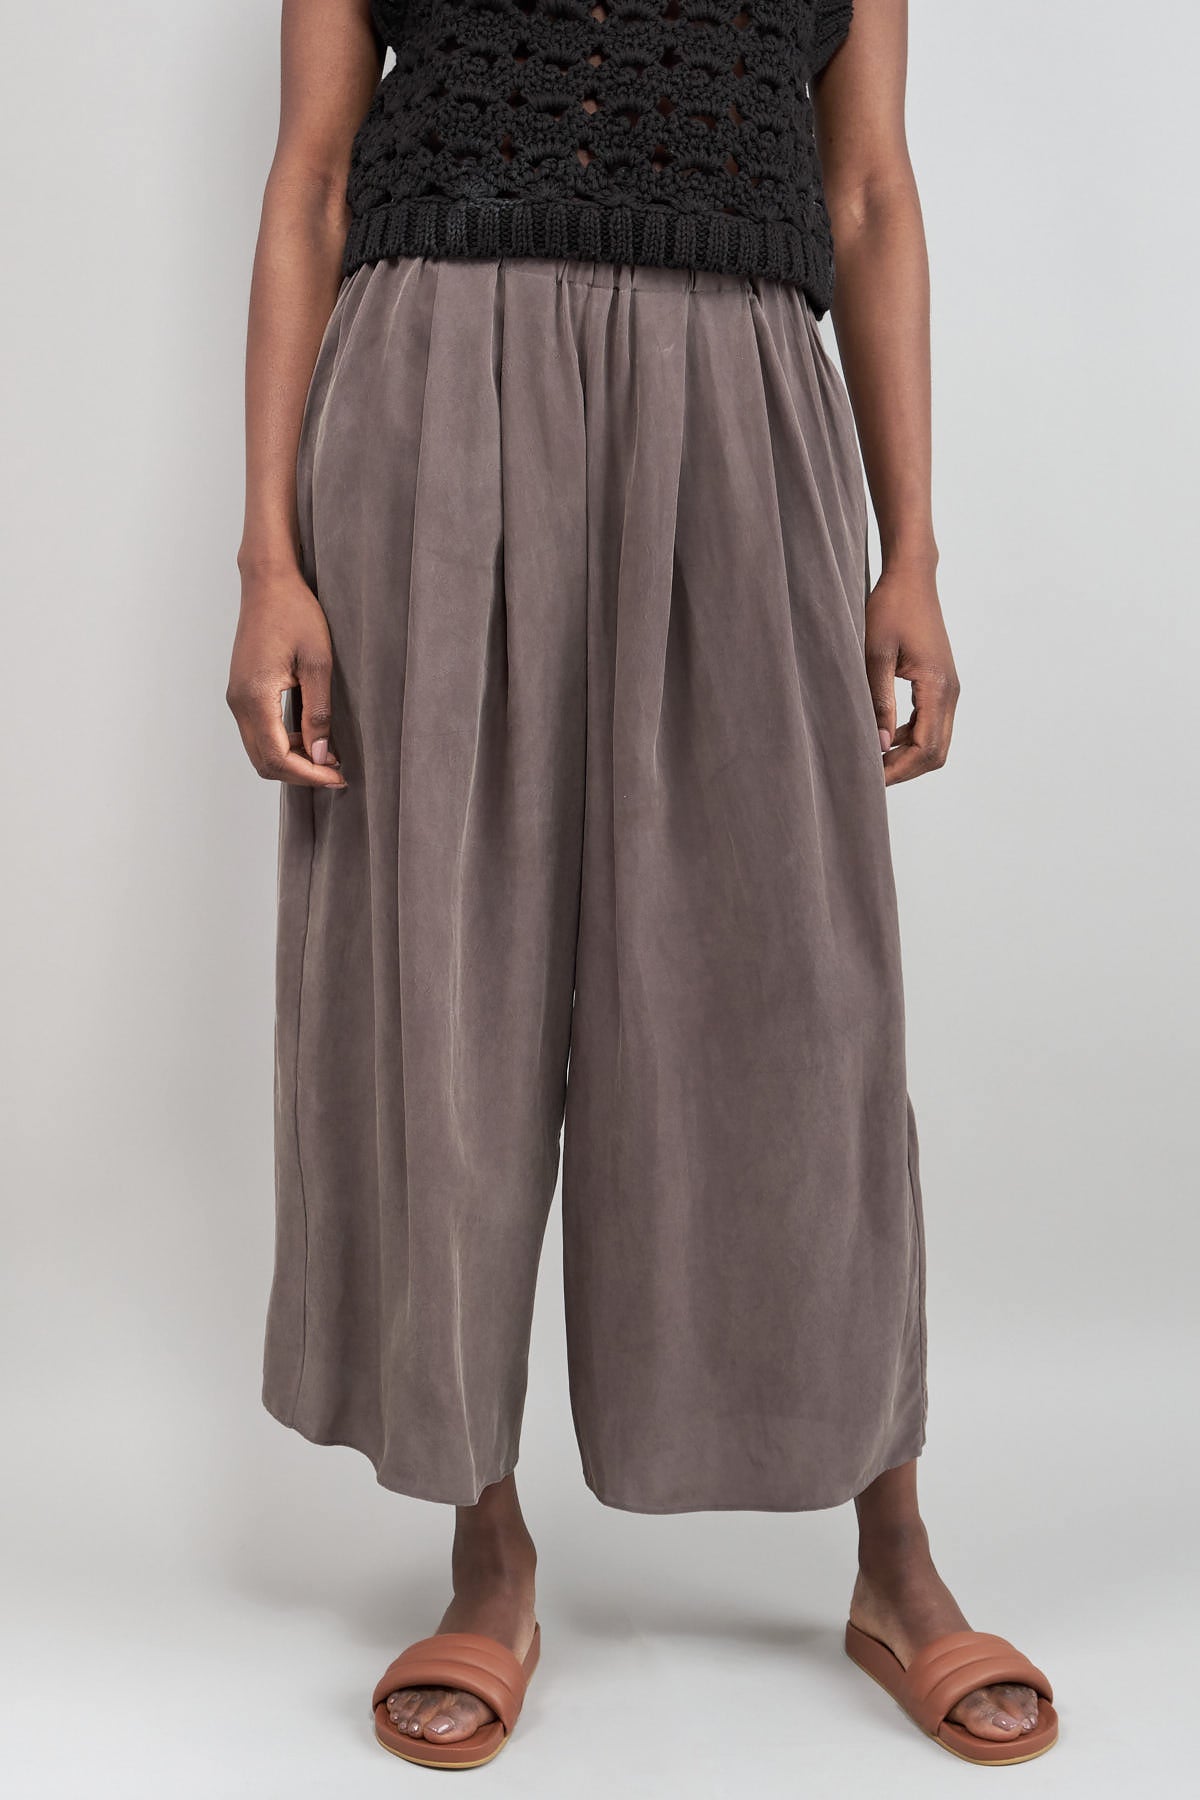 Front of Cayo Pant in Smoke